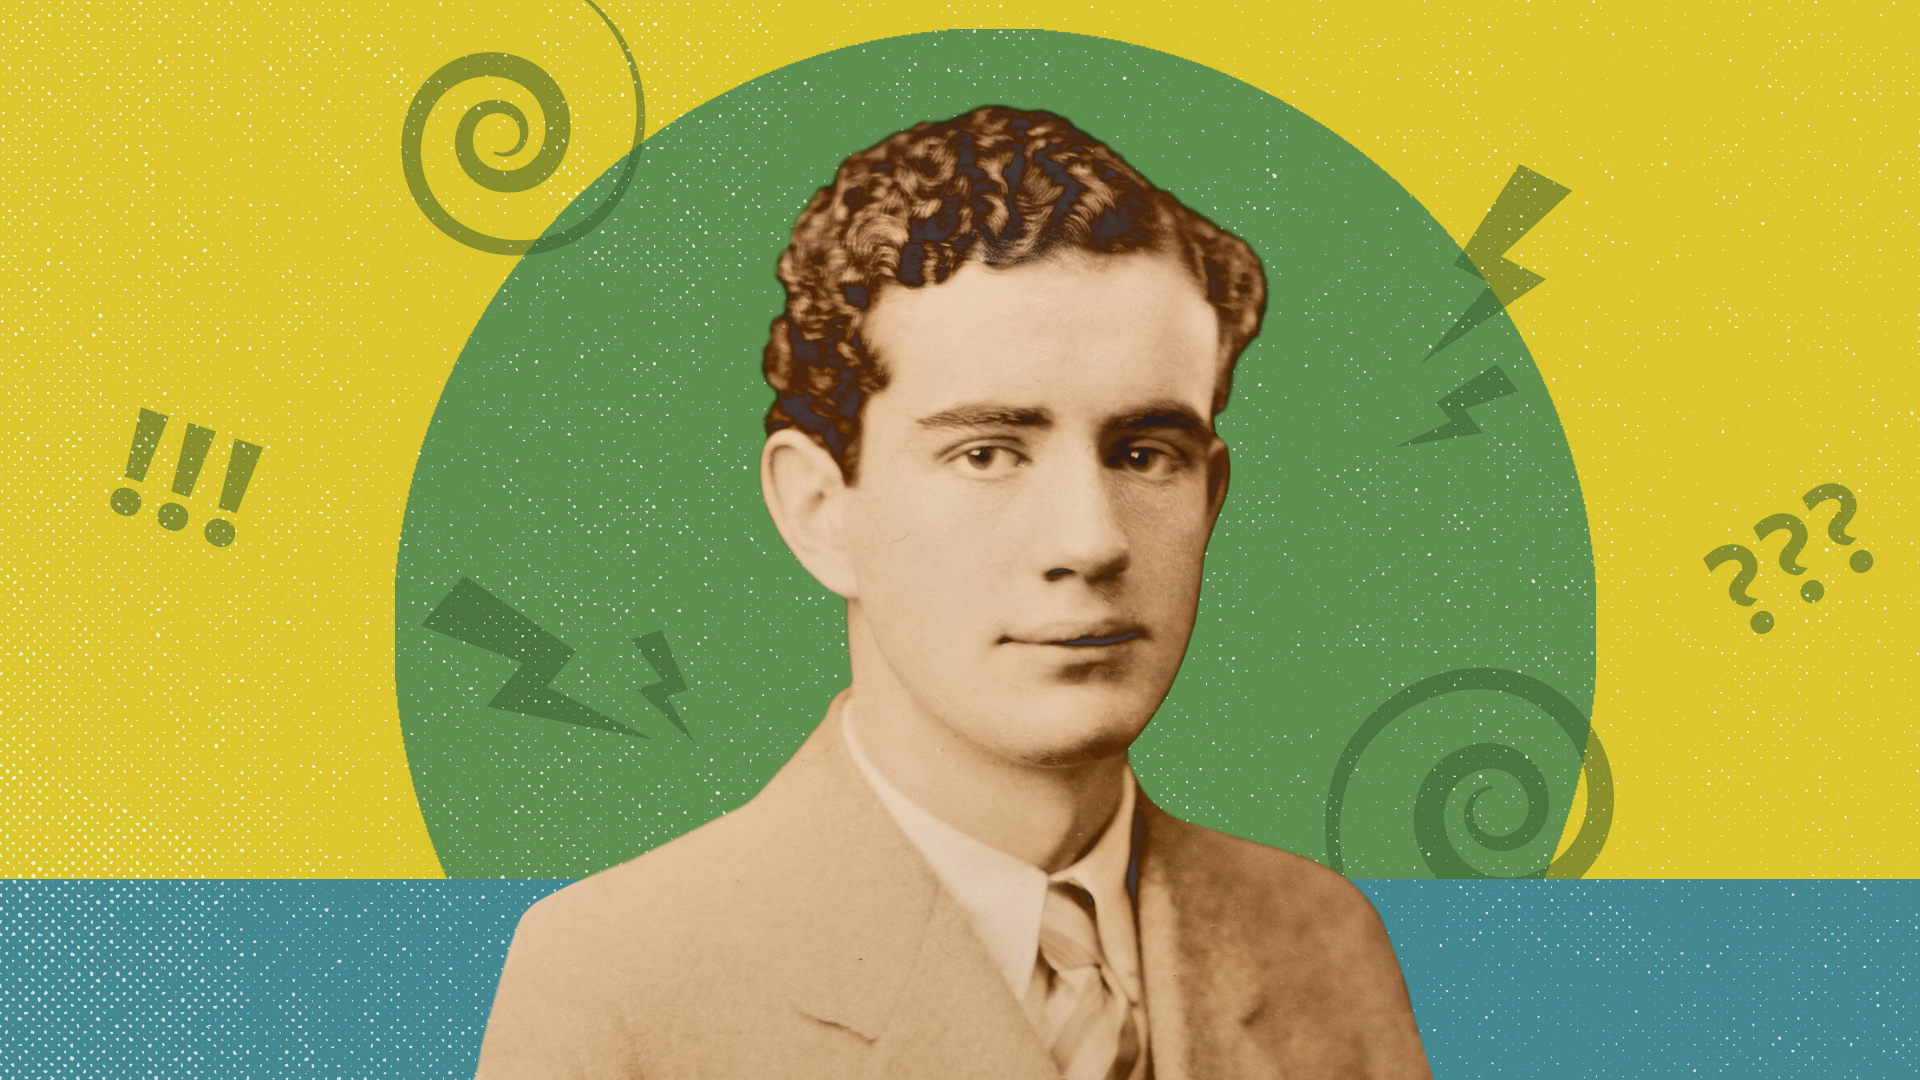 photo illustration of Hugh Troy, Class of 1926, on a graphic background